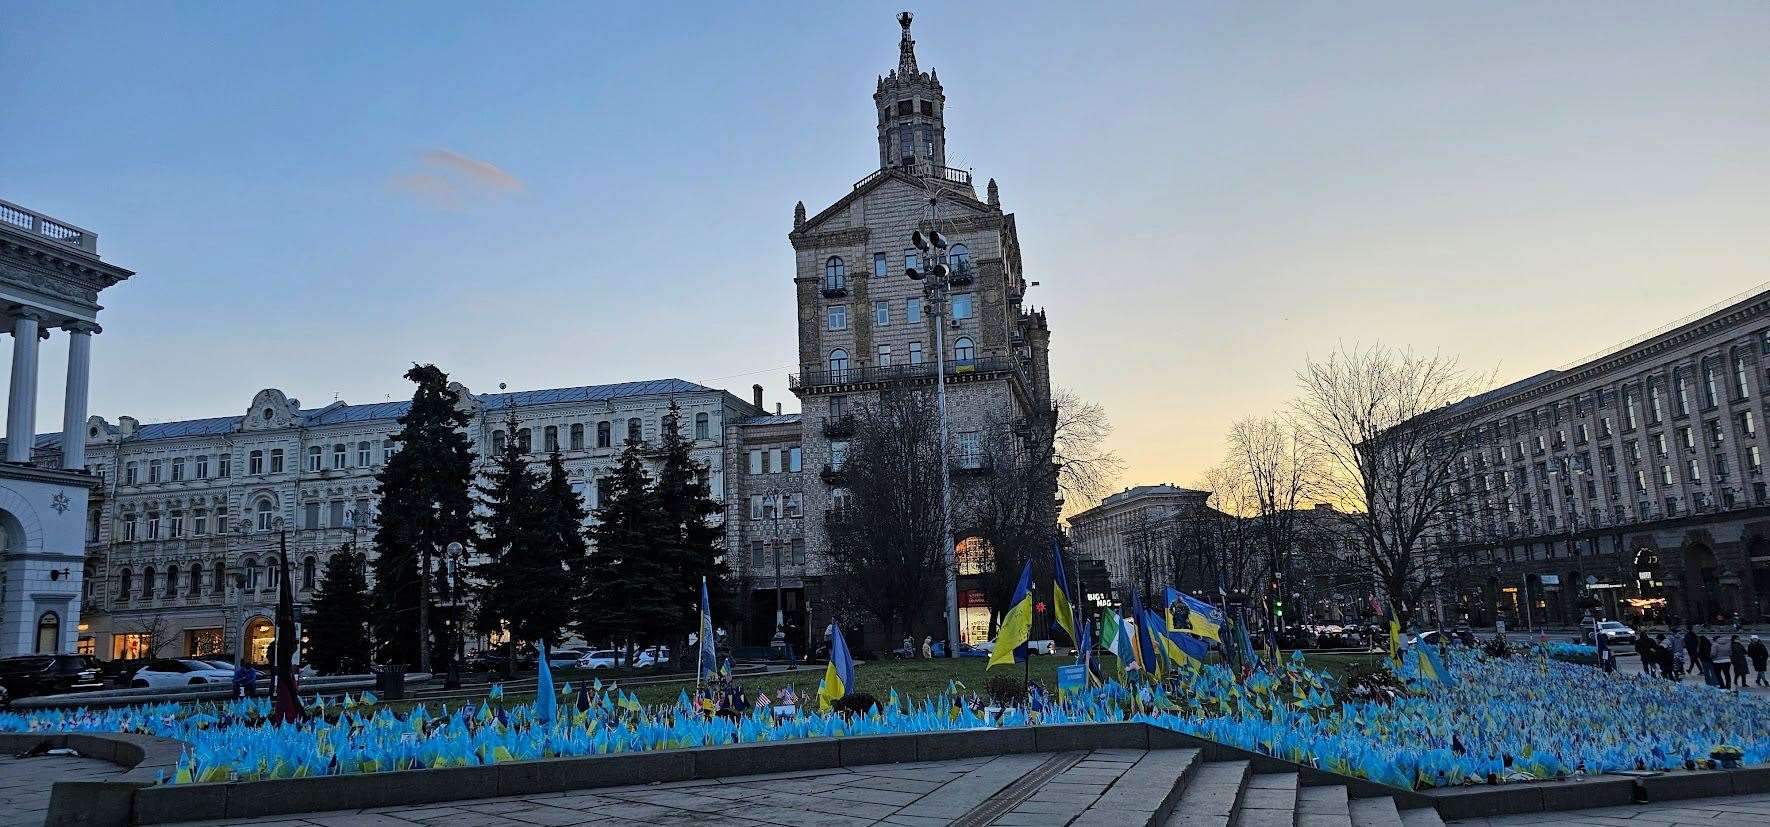 Flags for the fallen military in Ukraine. Picture supplied by Cllr Jordan Meade